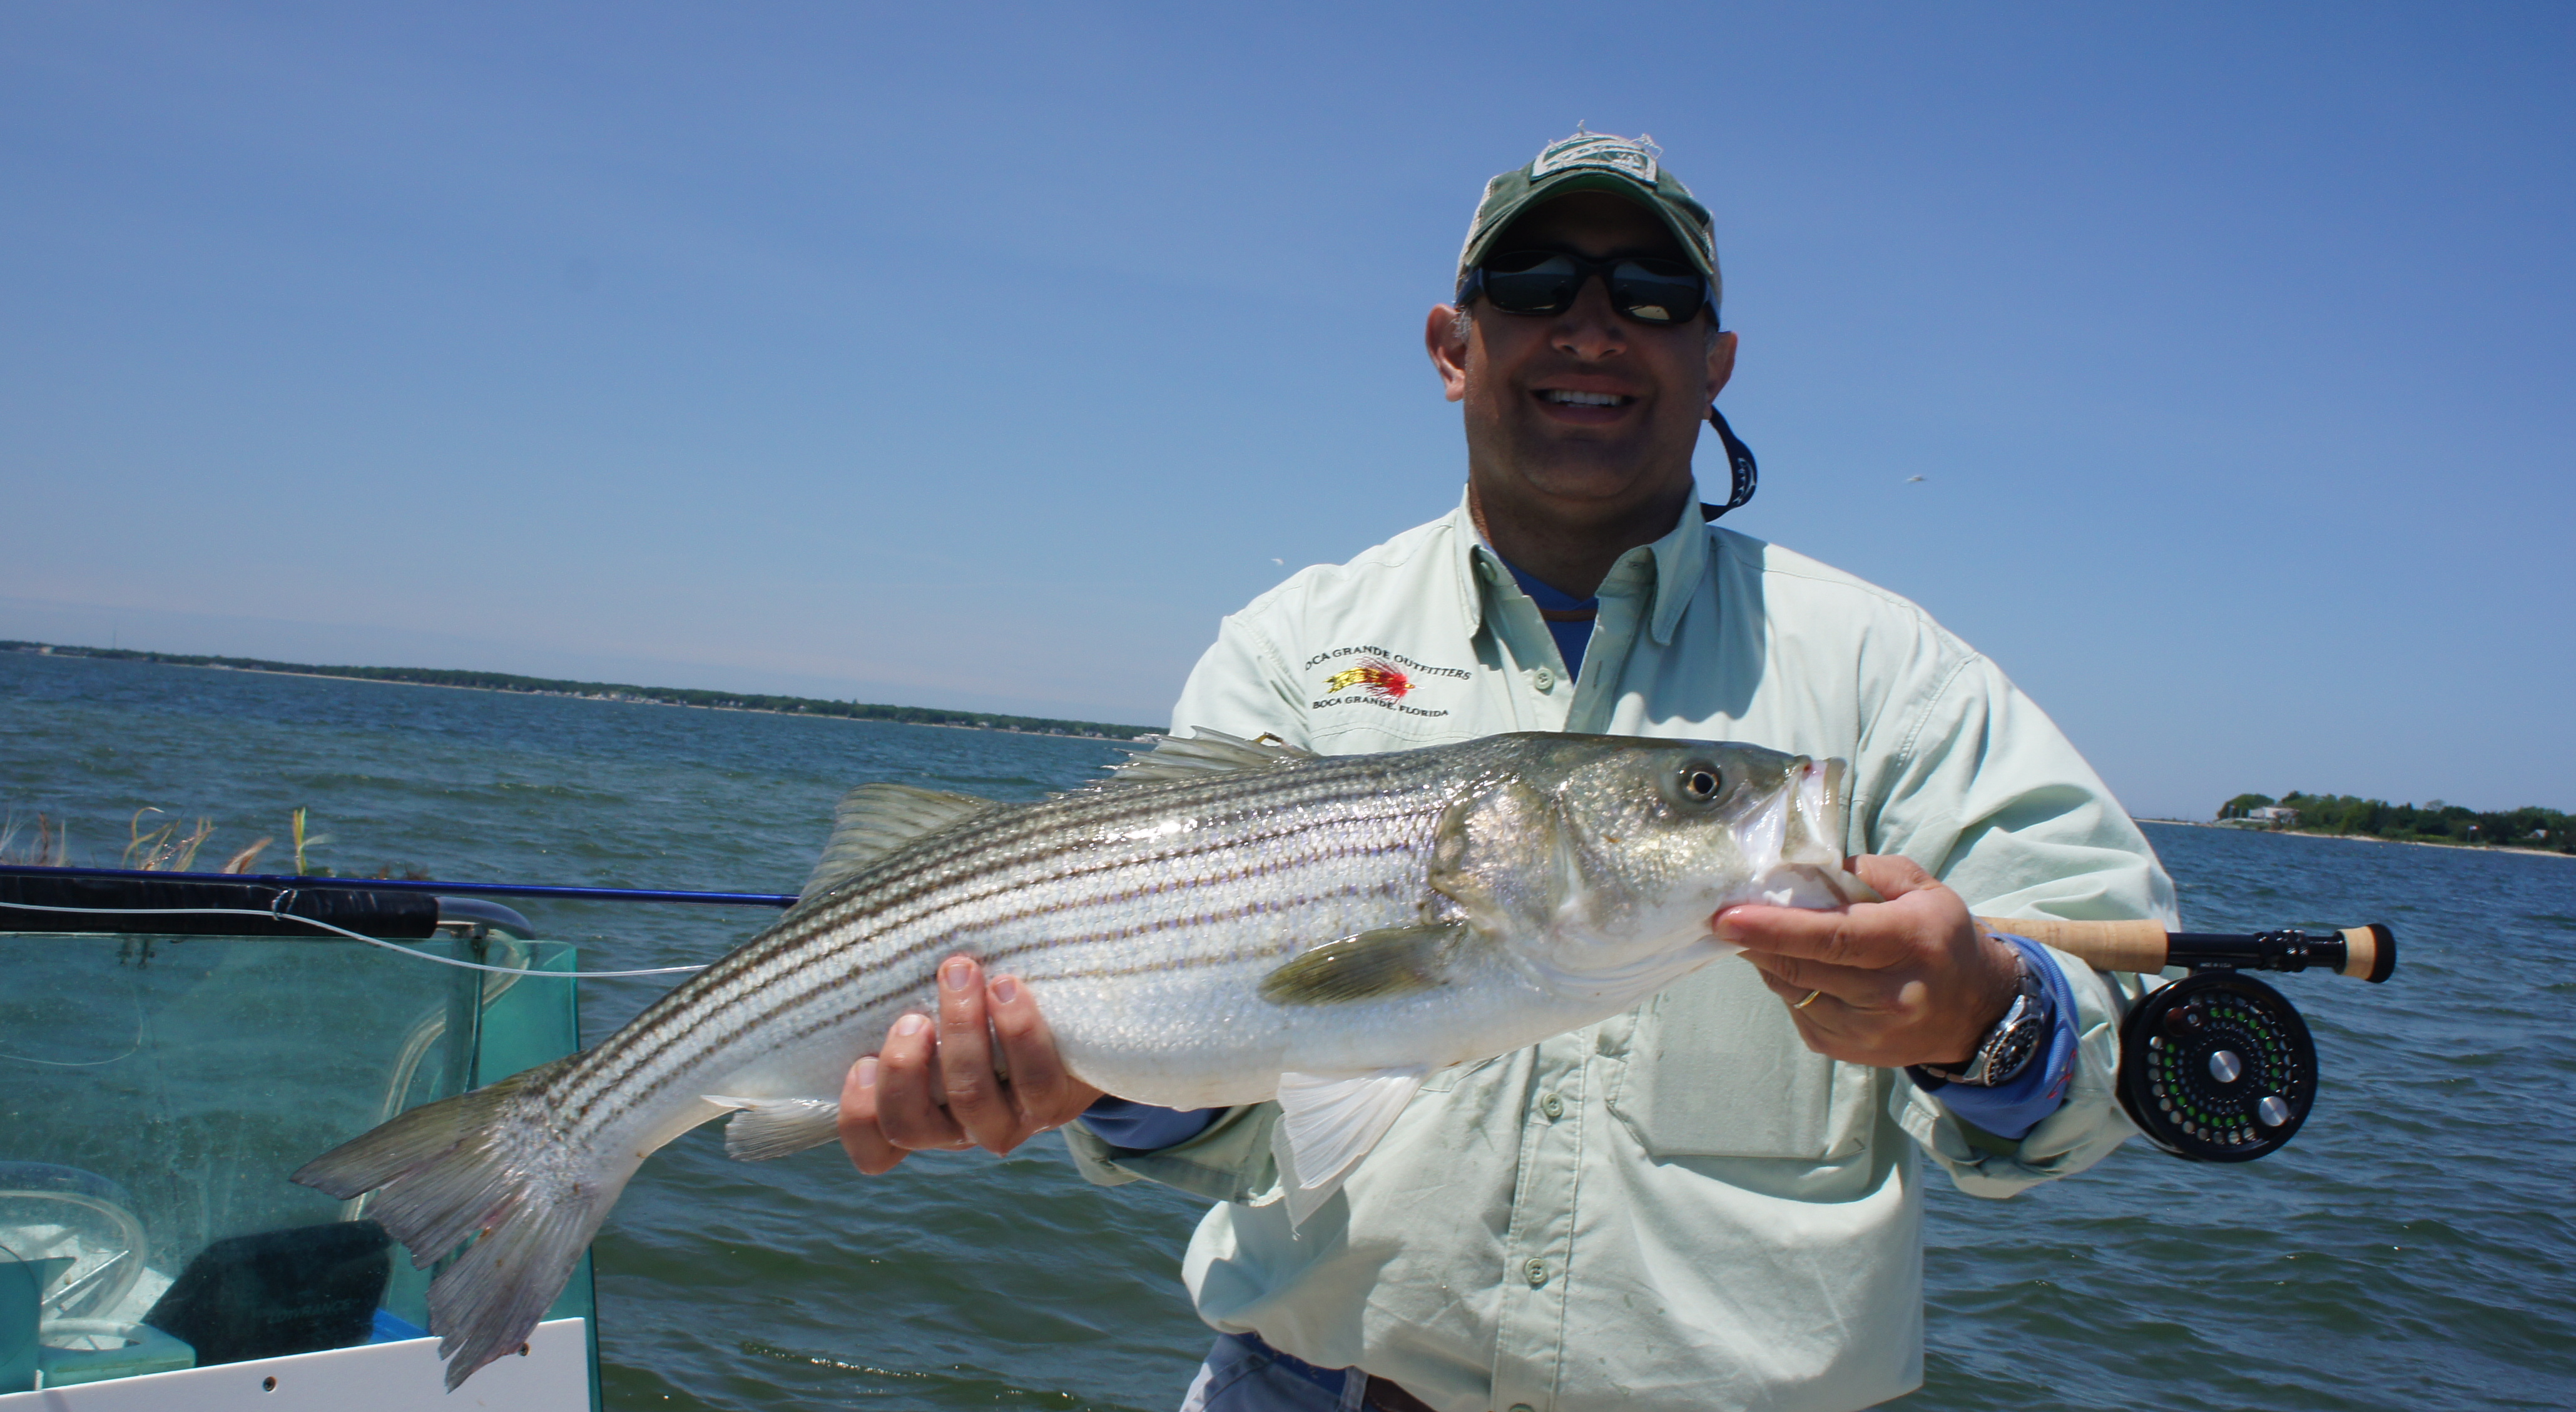 Conservation: With striped bass- pro-harvest vs. precaution - Fly